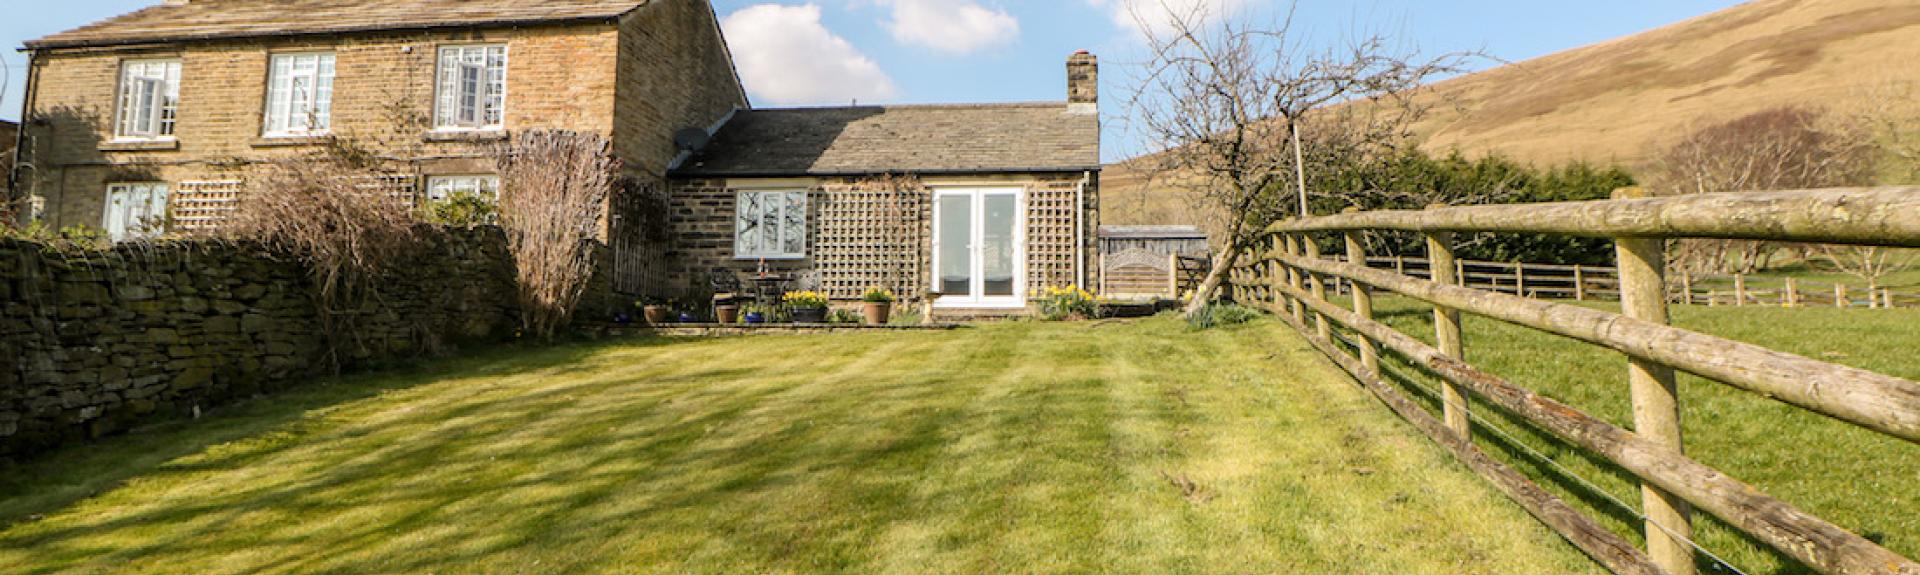 A large cottage with a ground floor extension is surrounded by open fields and moorland.